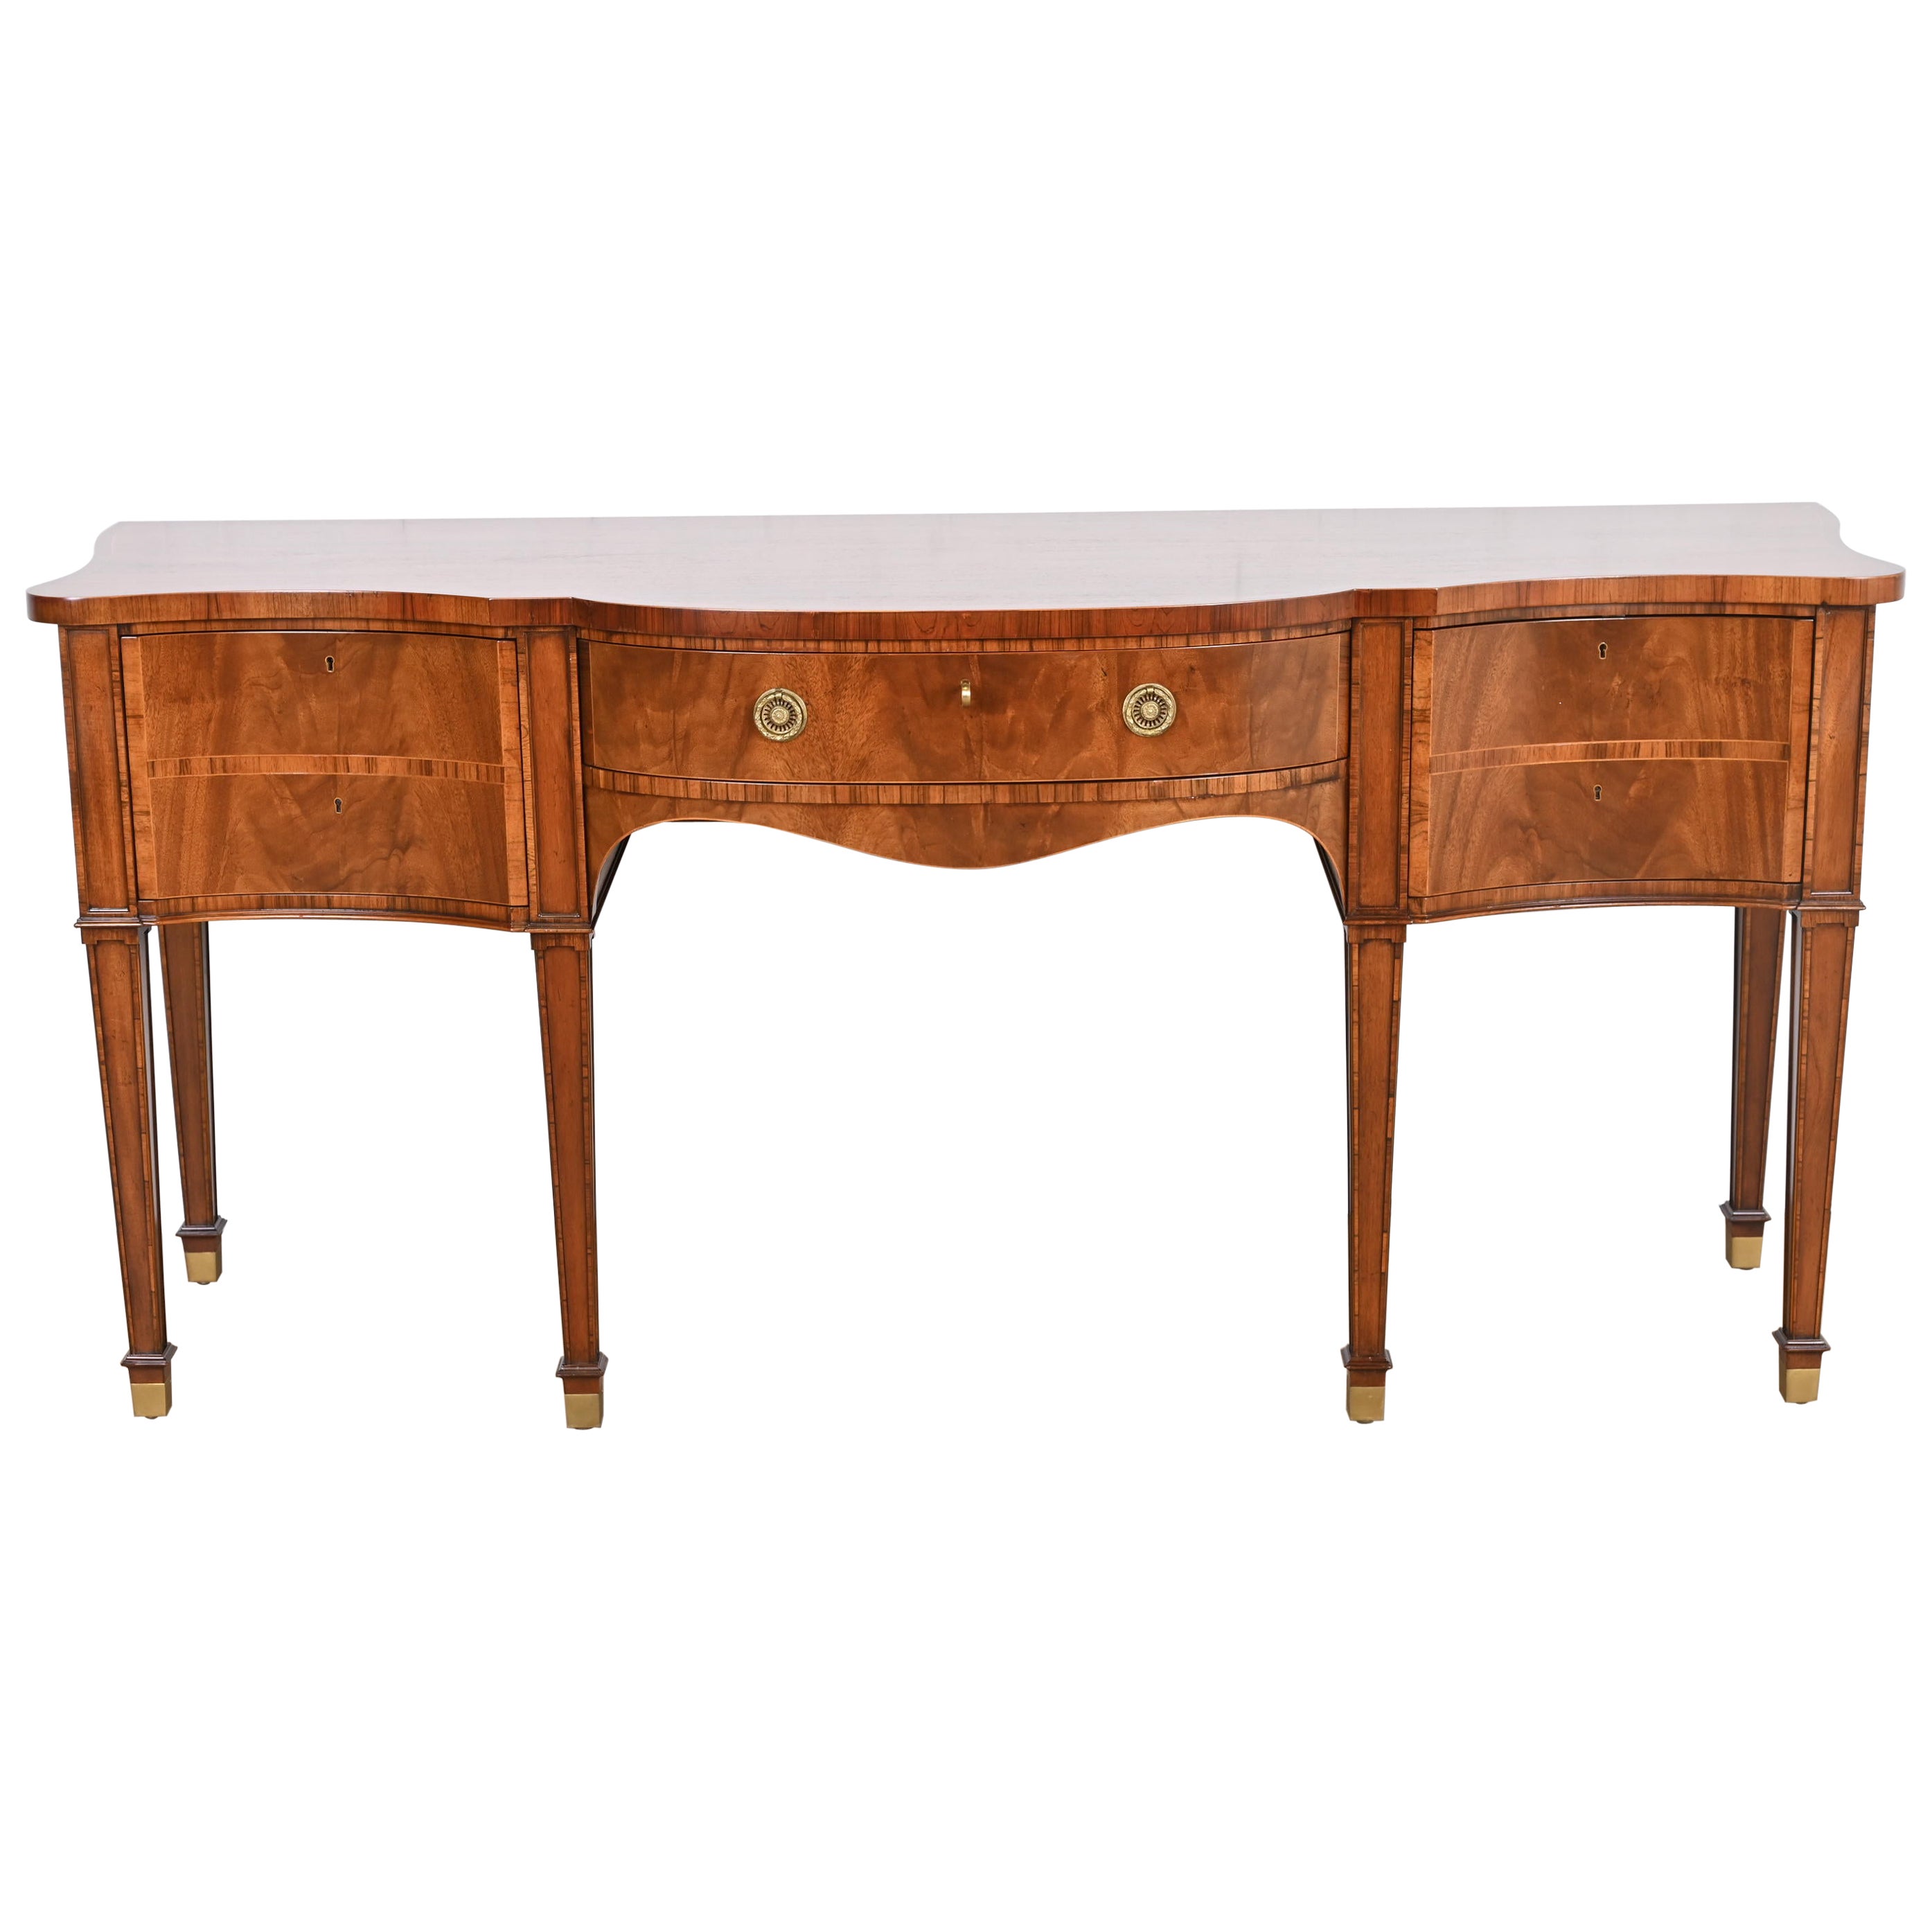 Baker Furniture Stately Homes Collection Georgian Flame Mahogany Sideboard